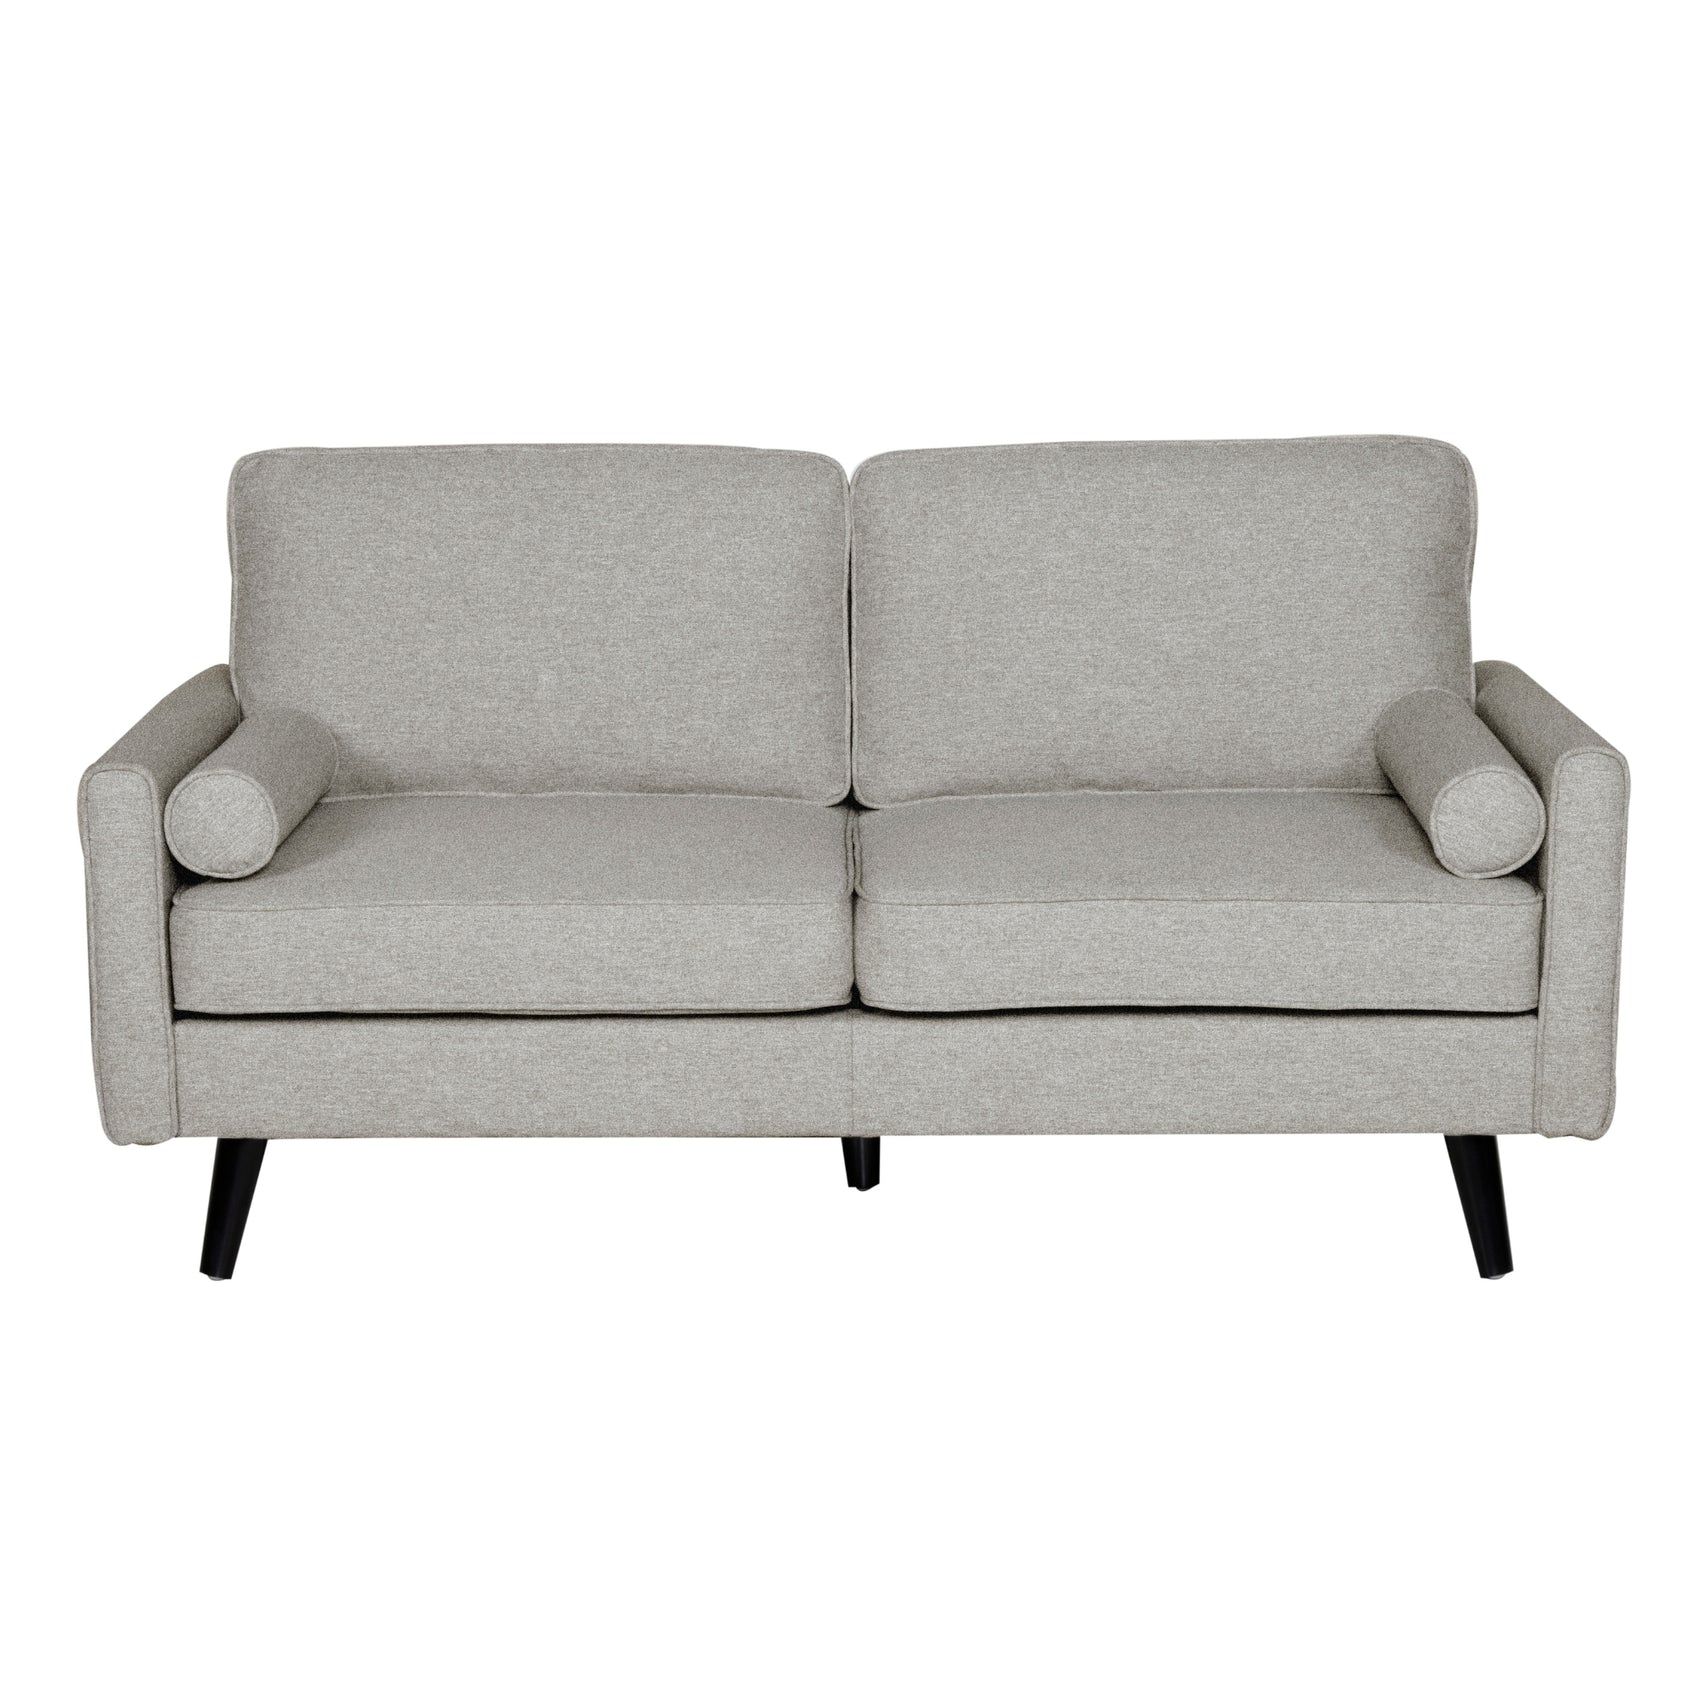 Lexi 2.5 Seater Sofa Fabric Uplholstered Lounge Couch - Light Grey